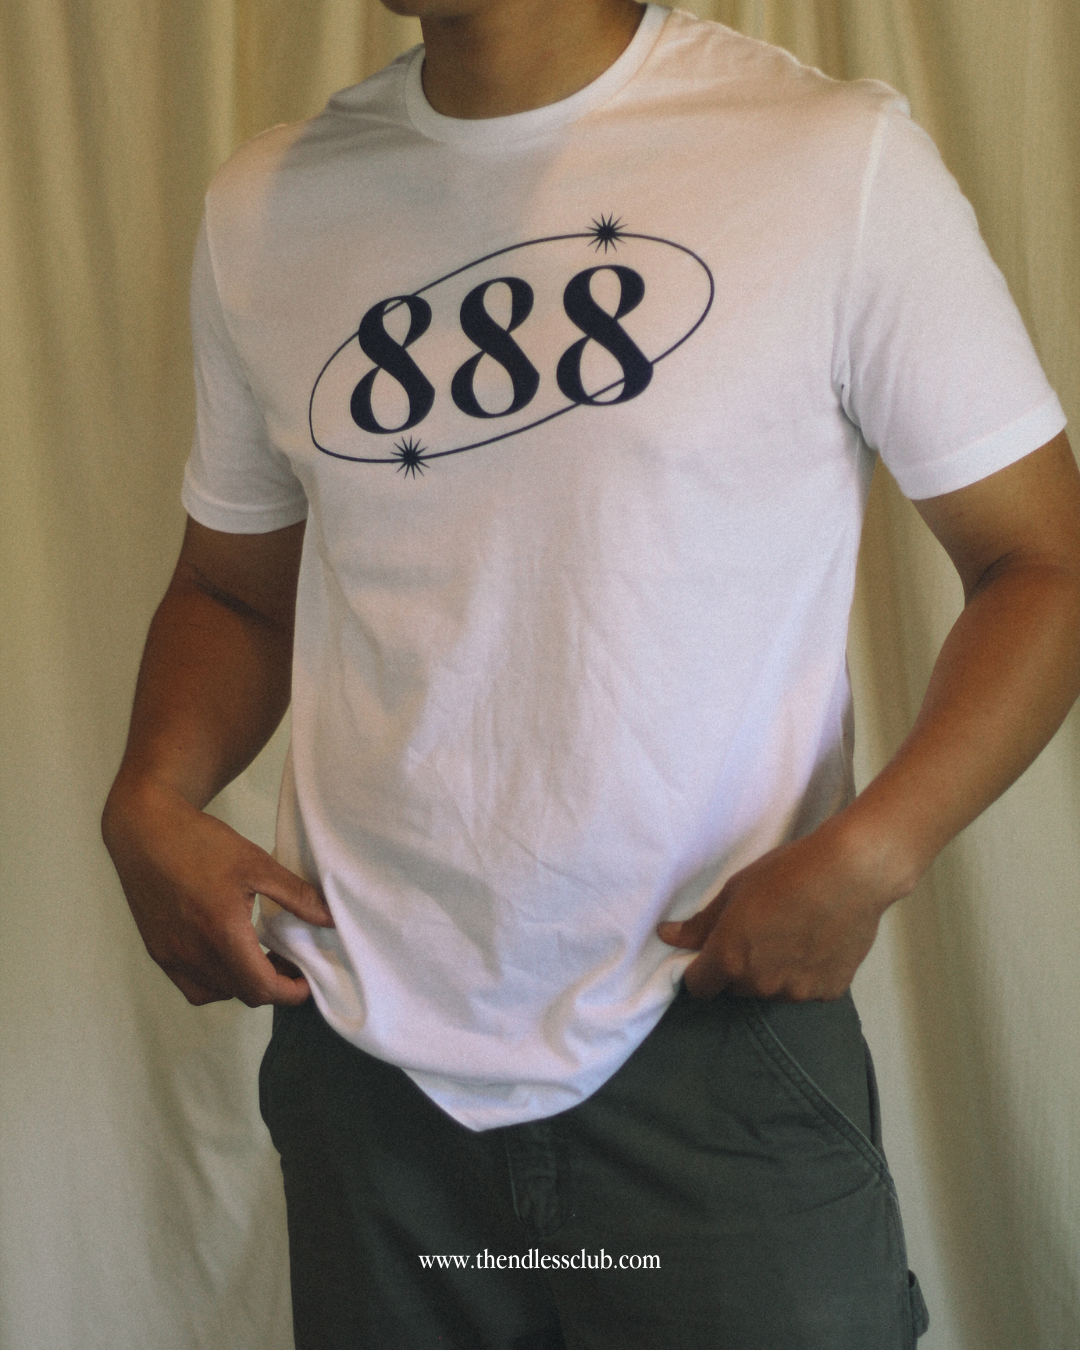 The 888 T-Shirt